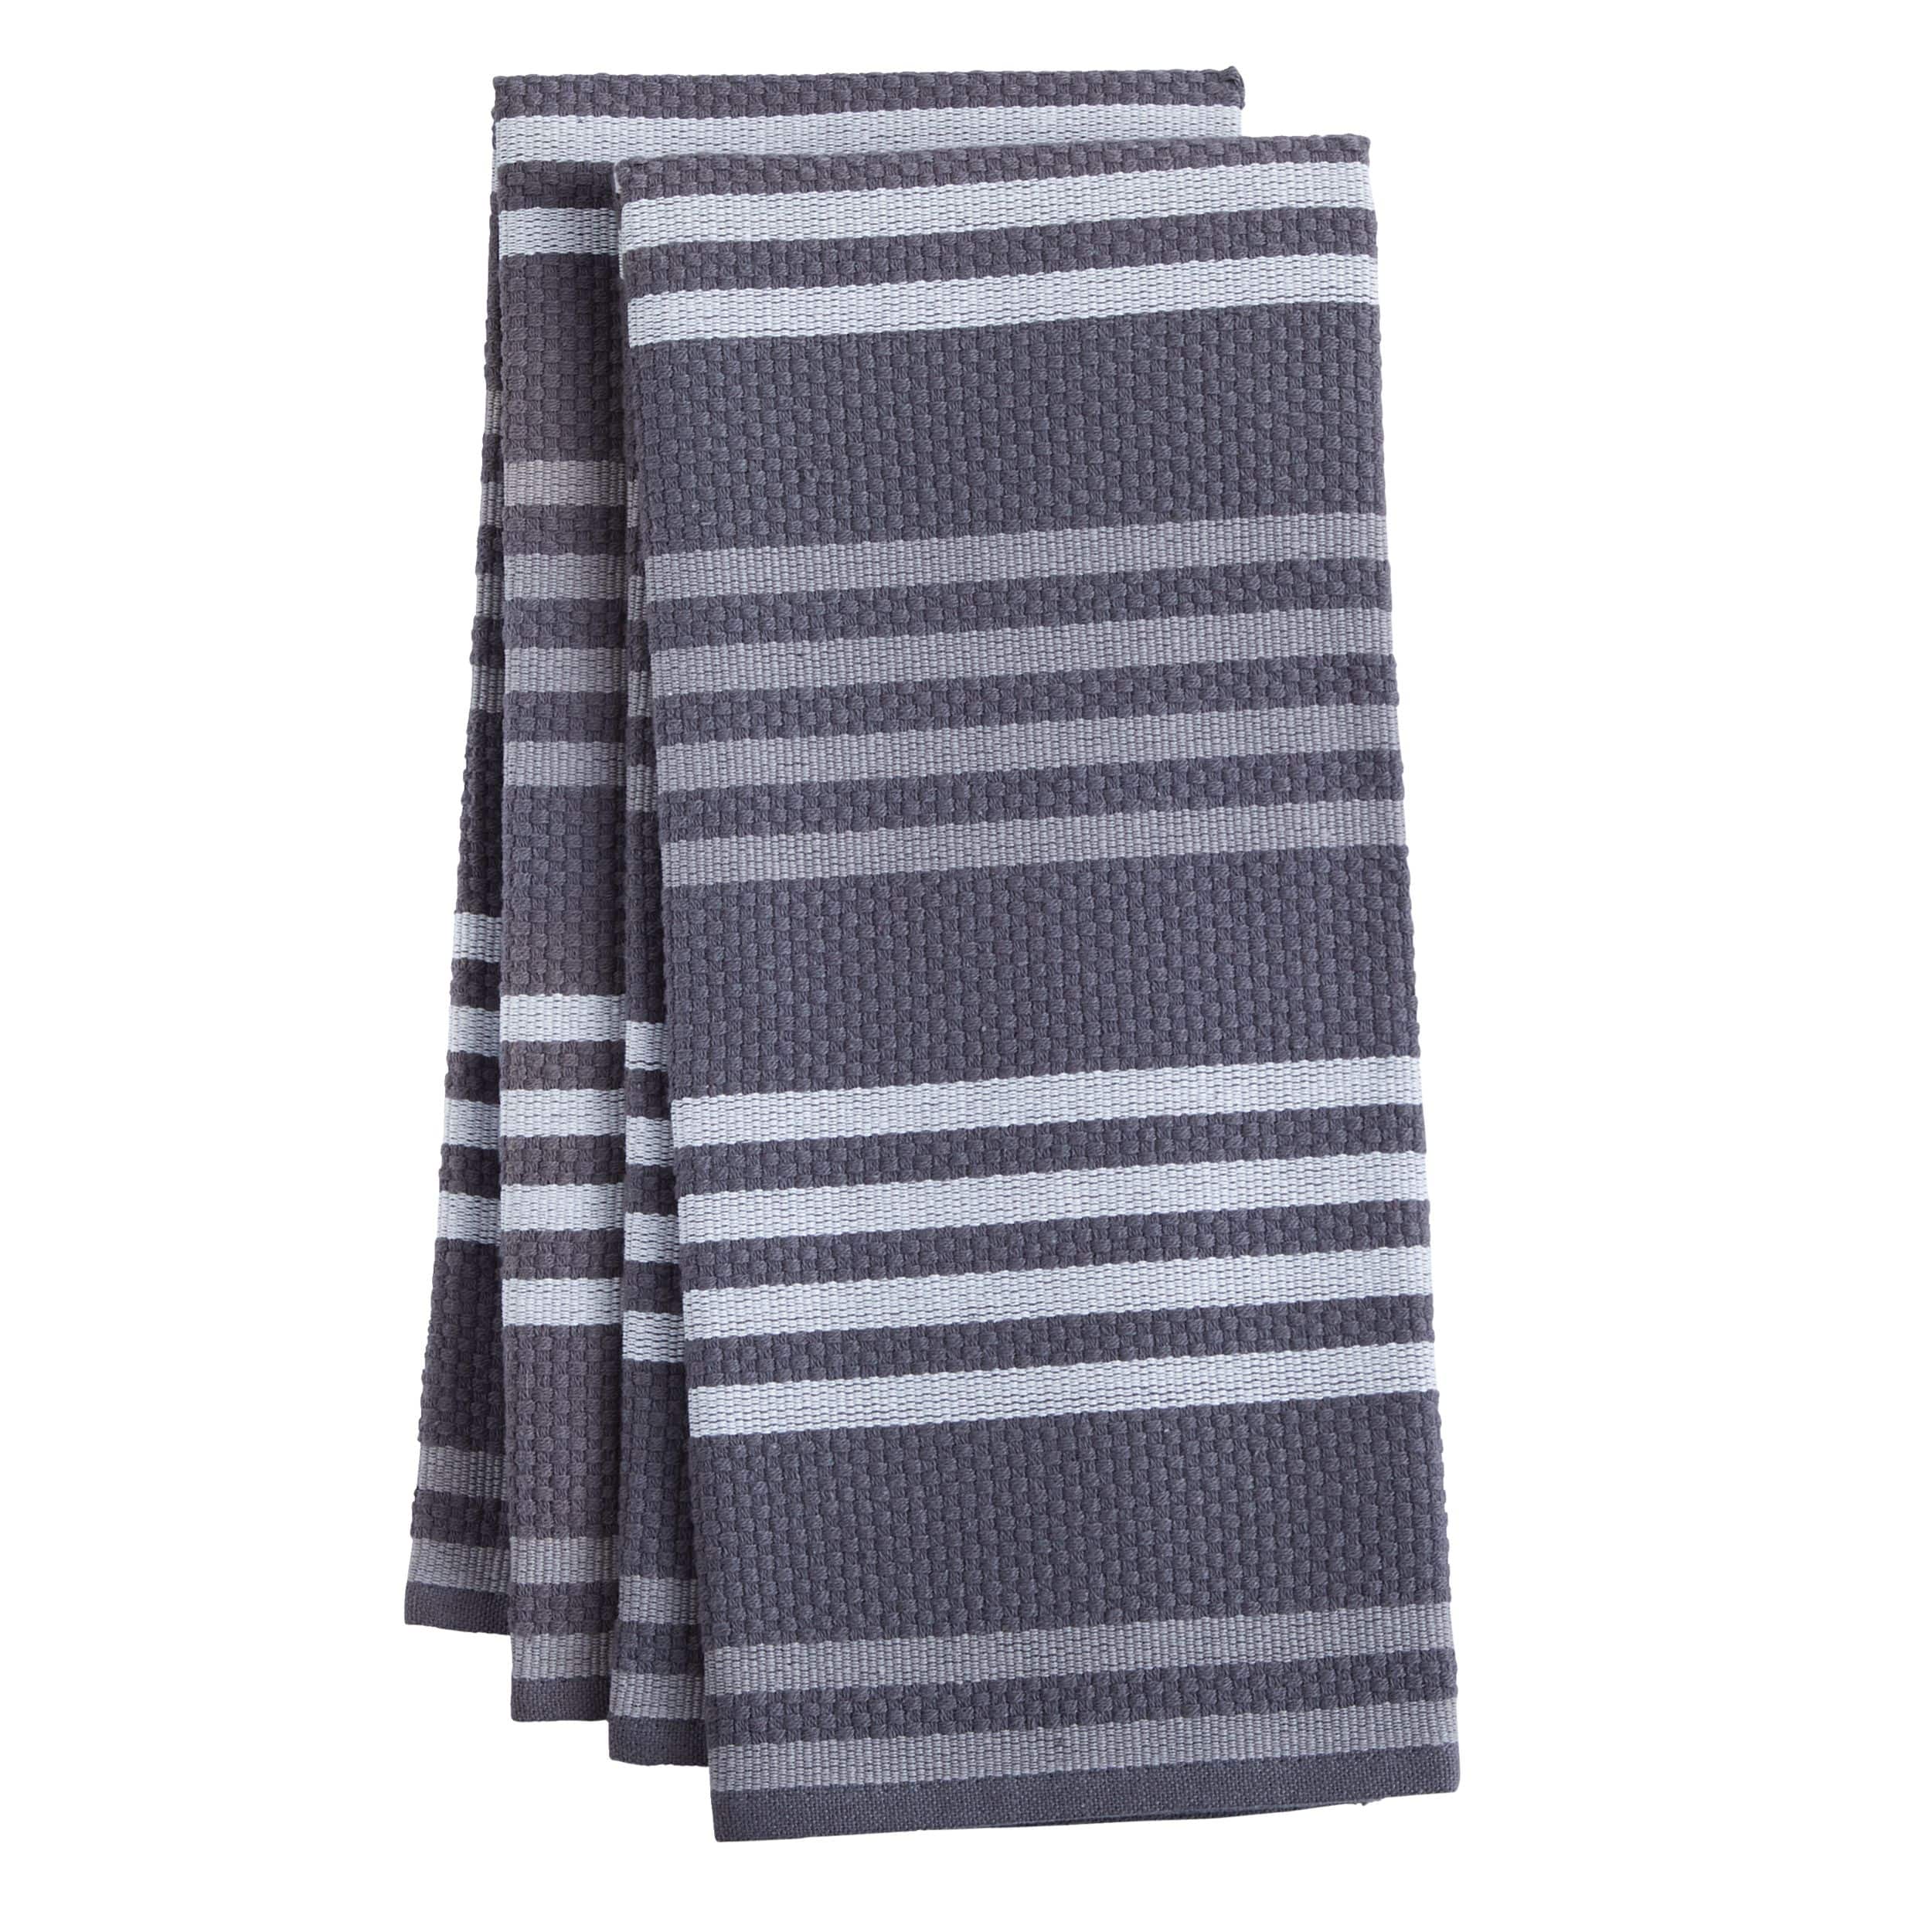 https://media-www.canadiantire.ca/product/living/kitchen/dining-and-entertaining/1422730/paderno-basketweave-kitchen-towel-2-pack-charcoal-56a56fb8-1fc1-49f6-ac46-19ea7895f7ce-jpgrendition.jpg